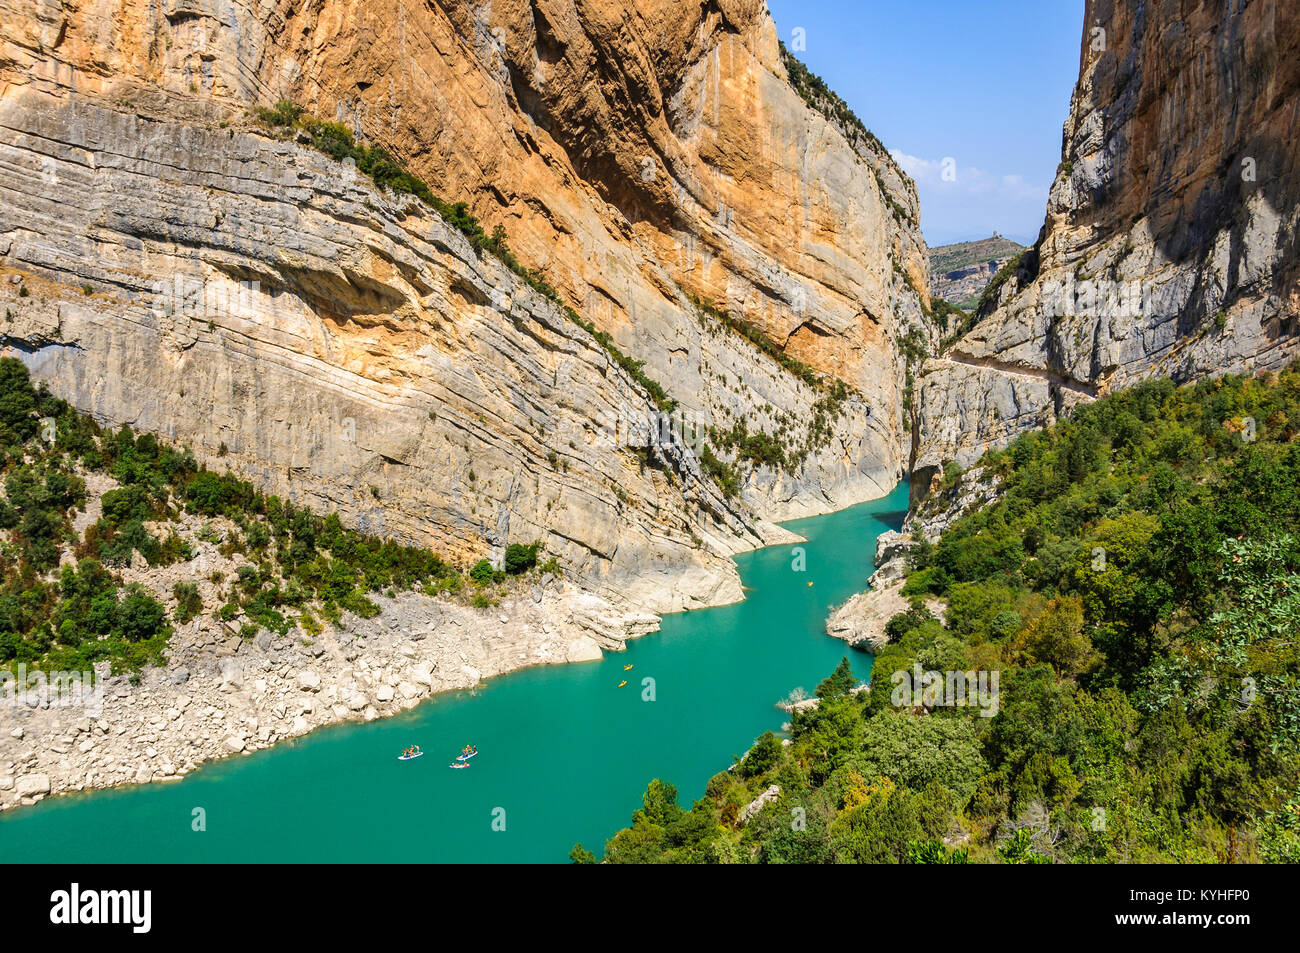 View of the Congost de Mont-rebei gorge in Catalonia, Spain Stock Photo